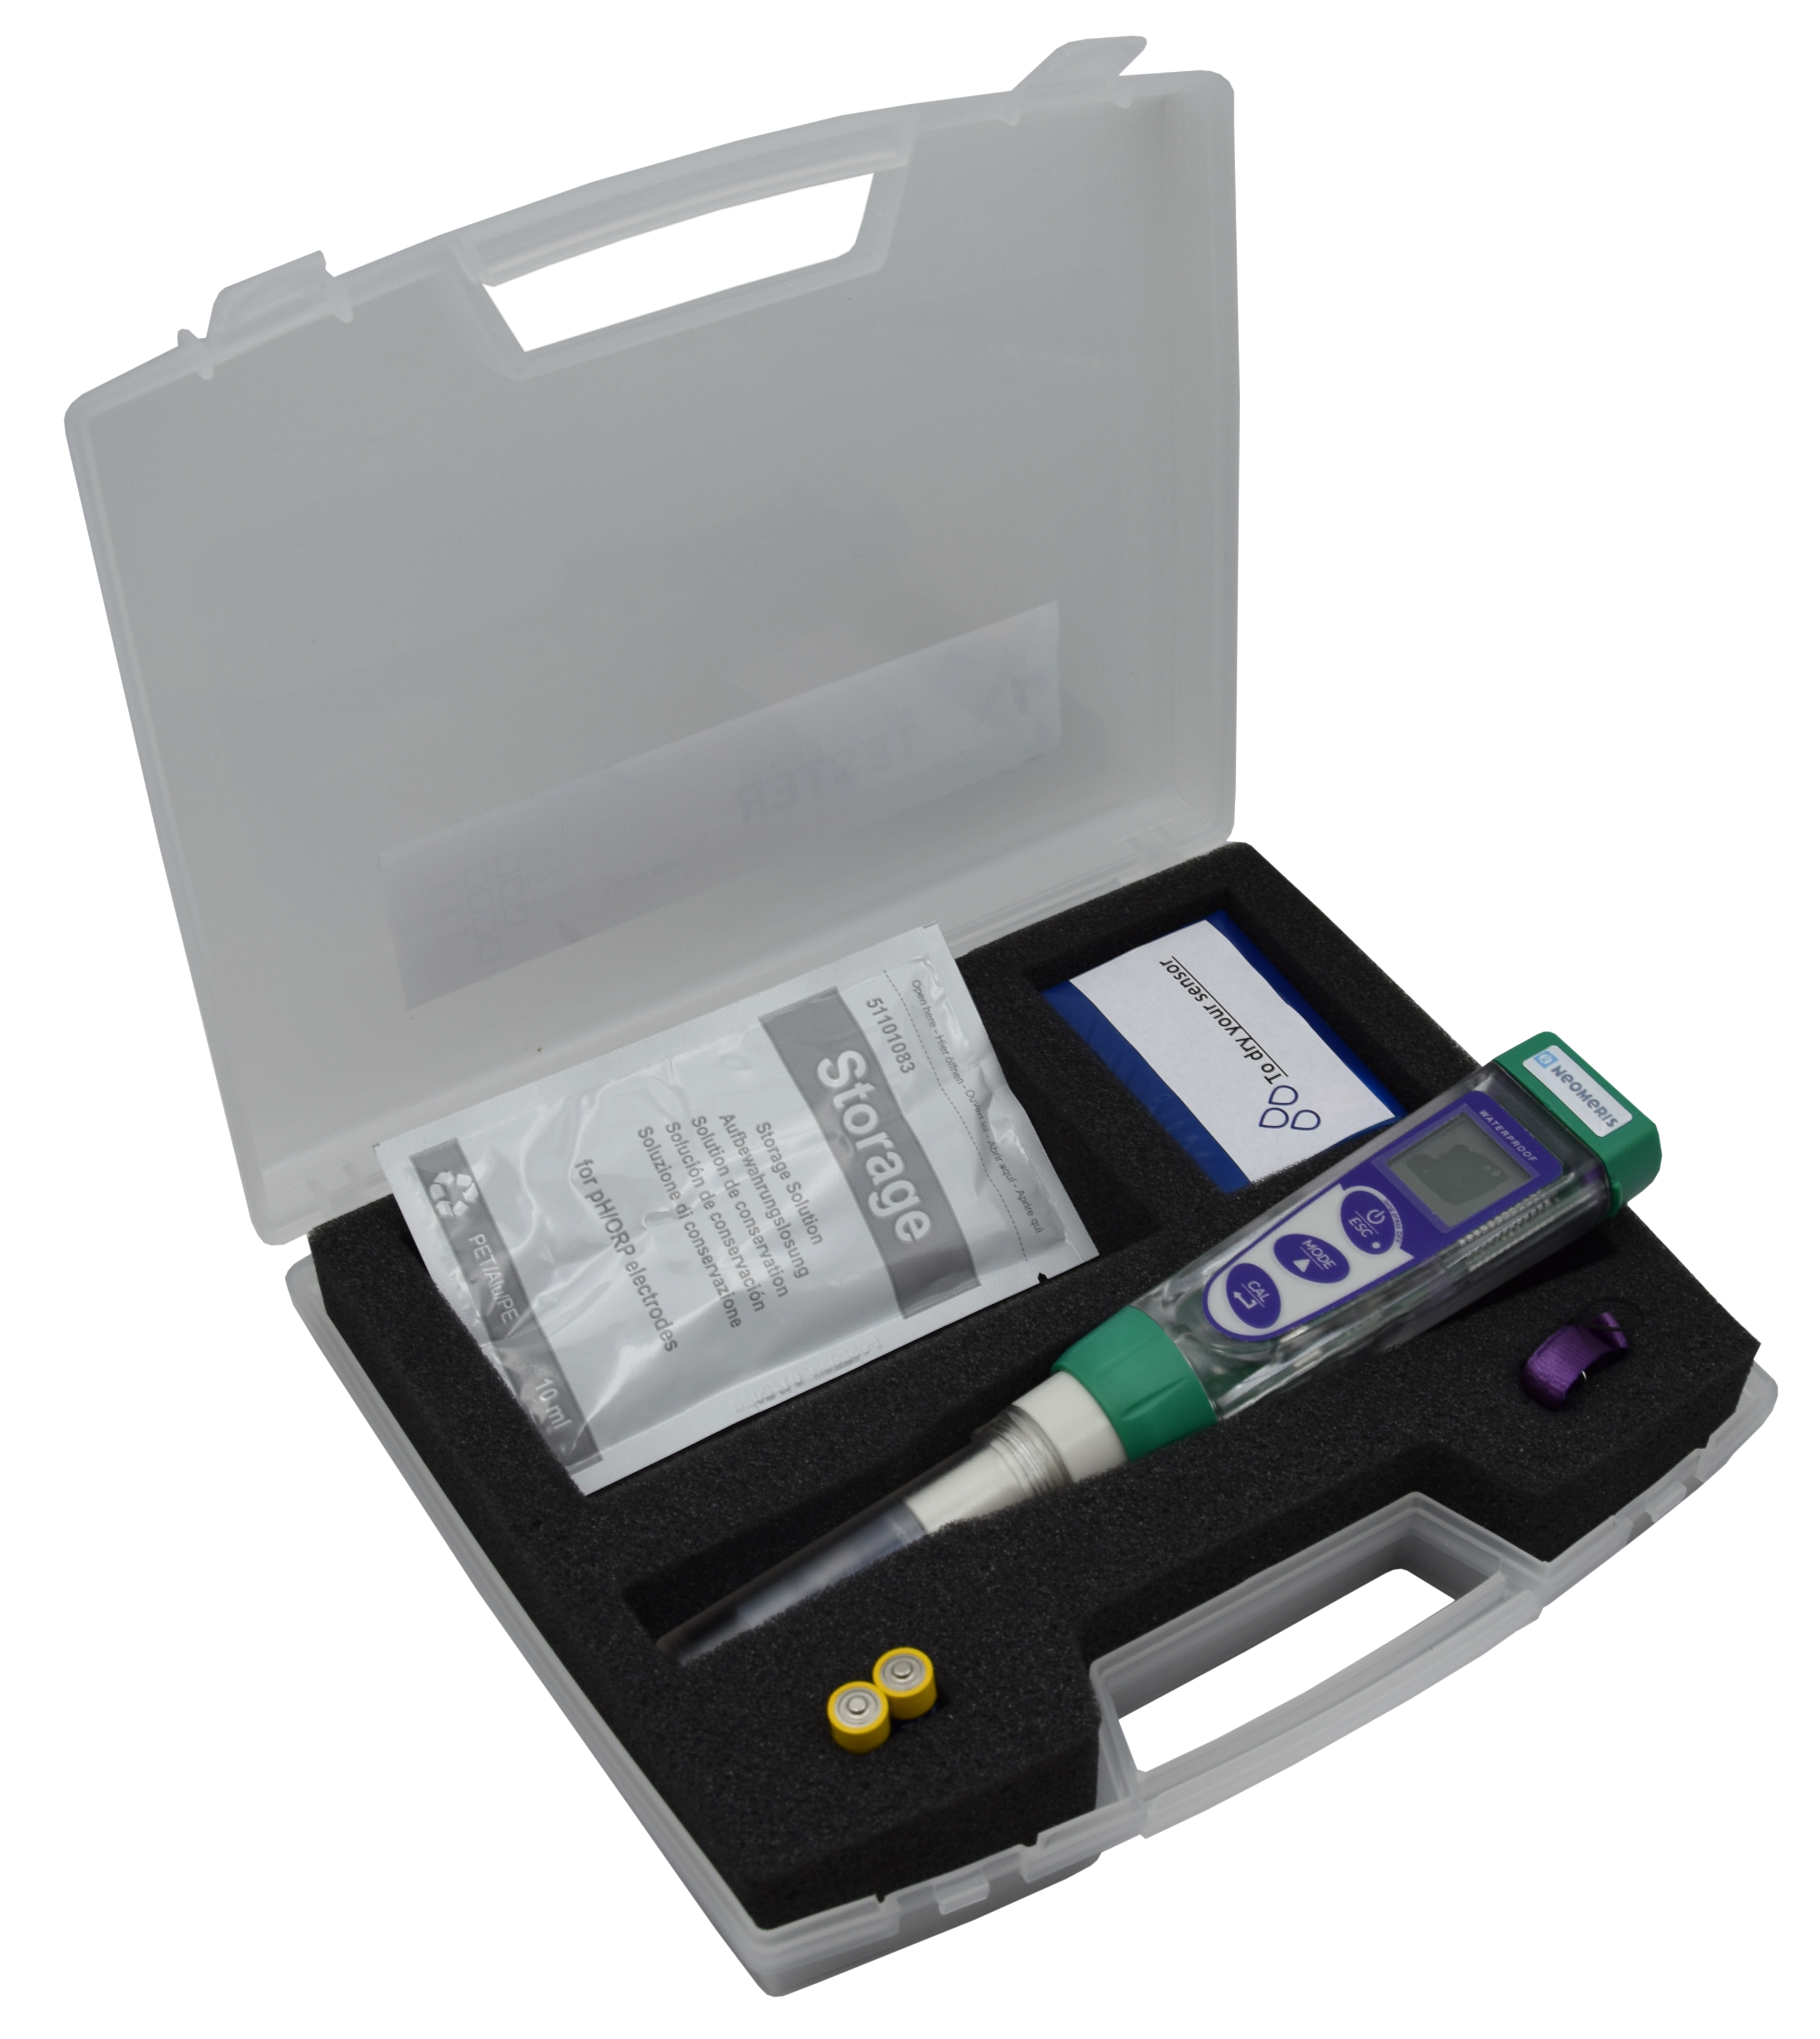 Basic pH 5 pocket tester in measuring case - handheld tester for determining the pH value and temperature